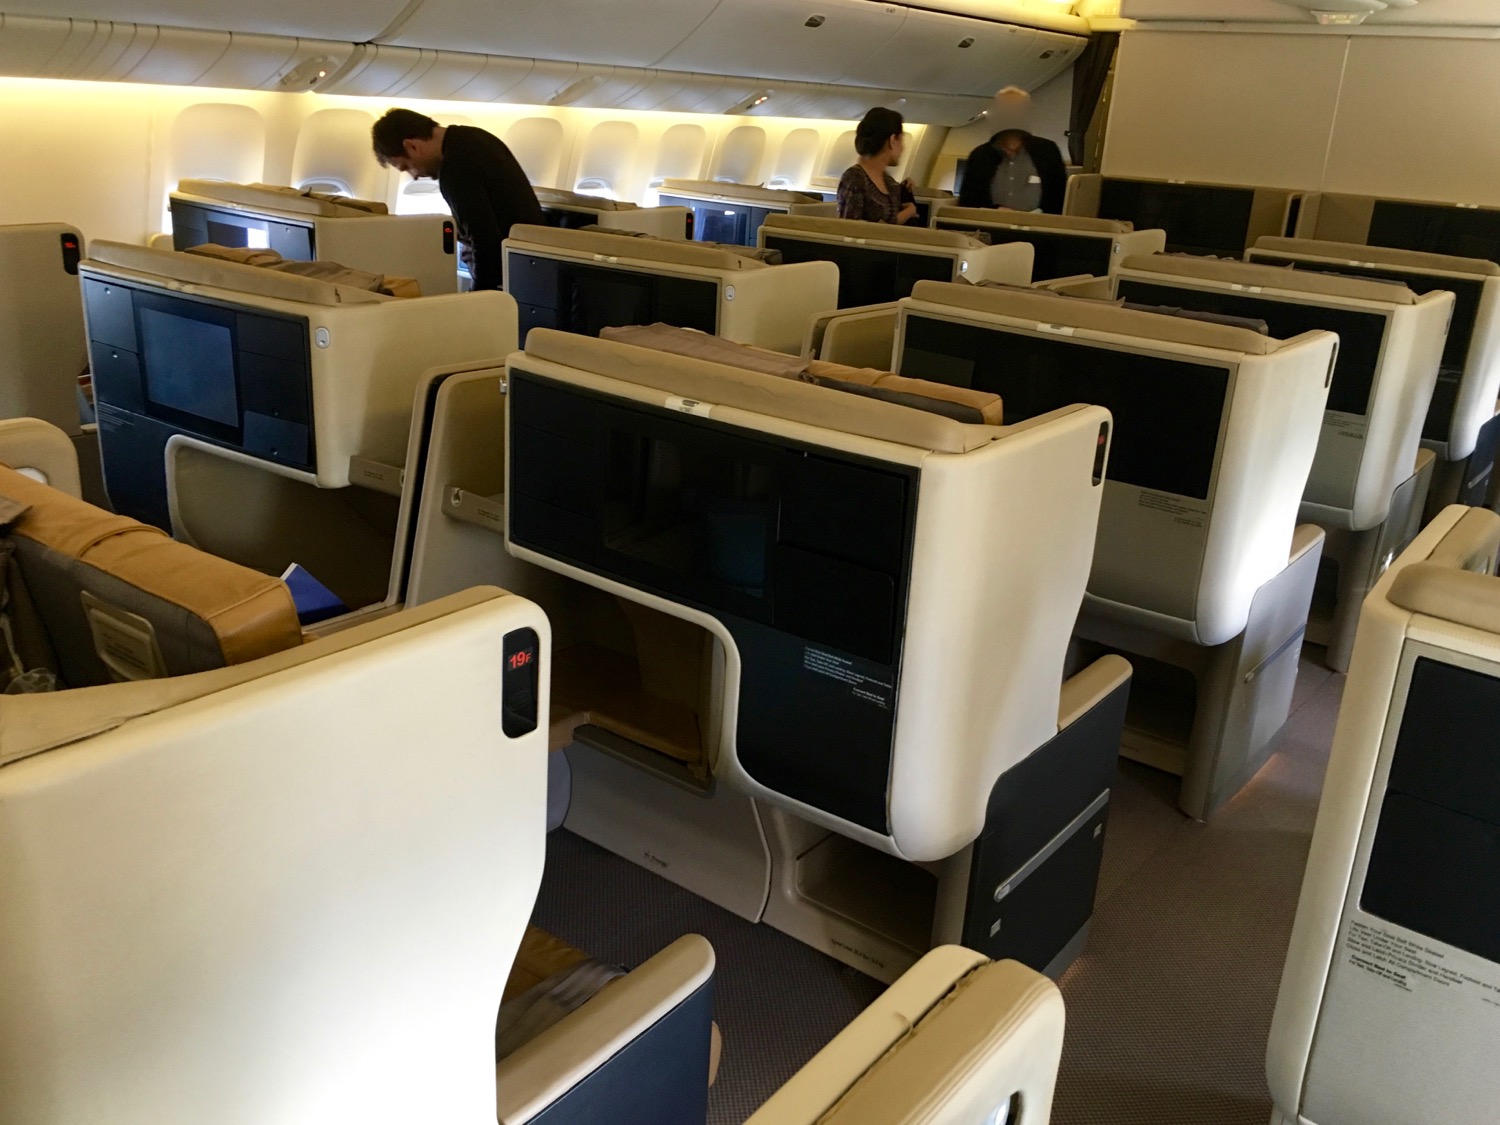 Бизнес класс б. B777 Singapore Airlines Business class. Boeing 777 Singapore Airlines. Бизнес класс Аэрофлот Боинг 777. Боинг 777 212 Singapore Airlines салон.